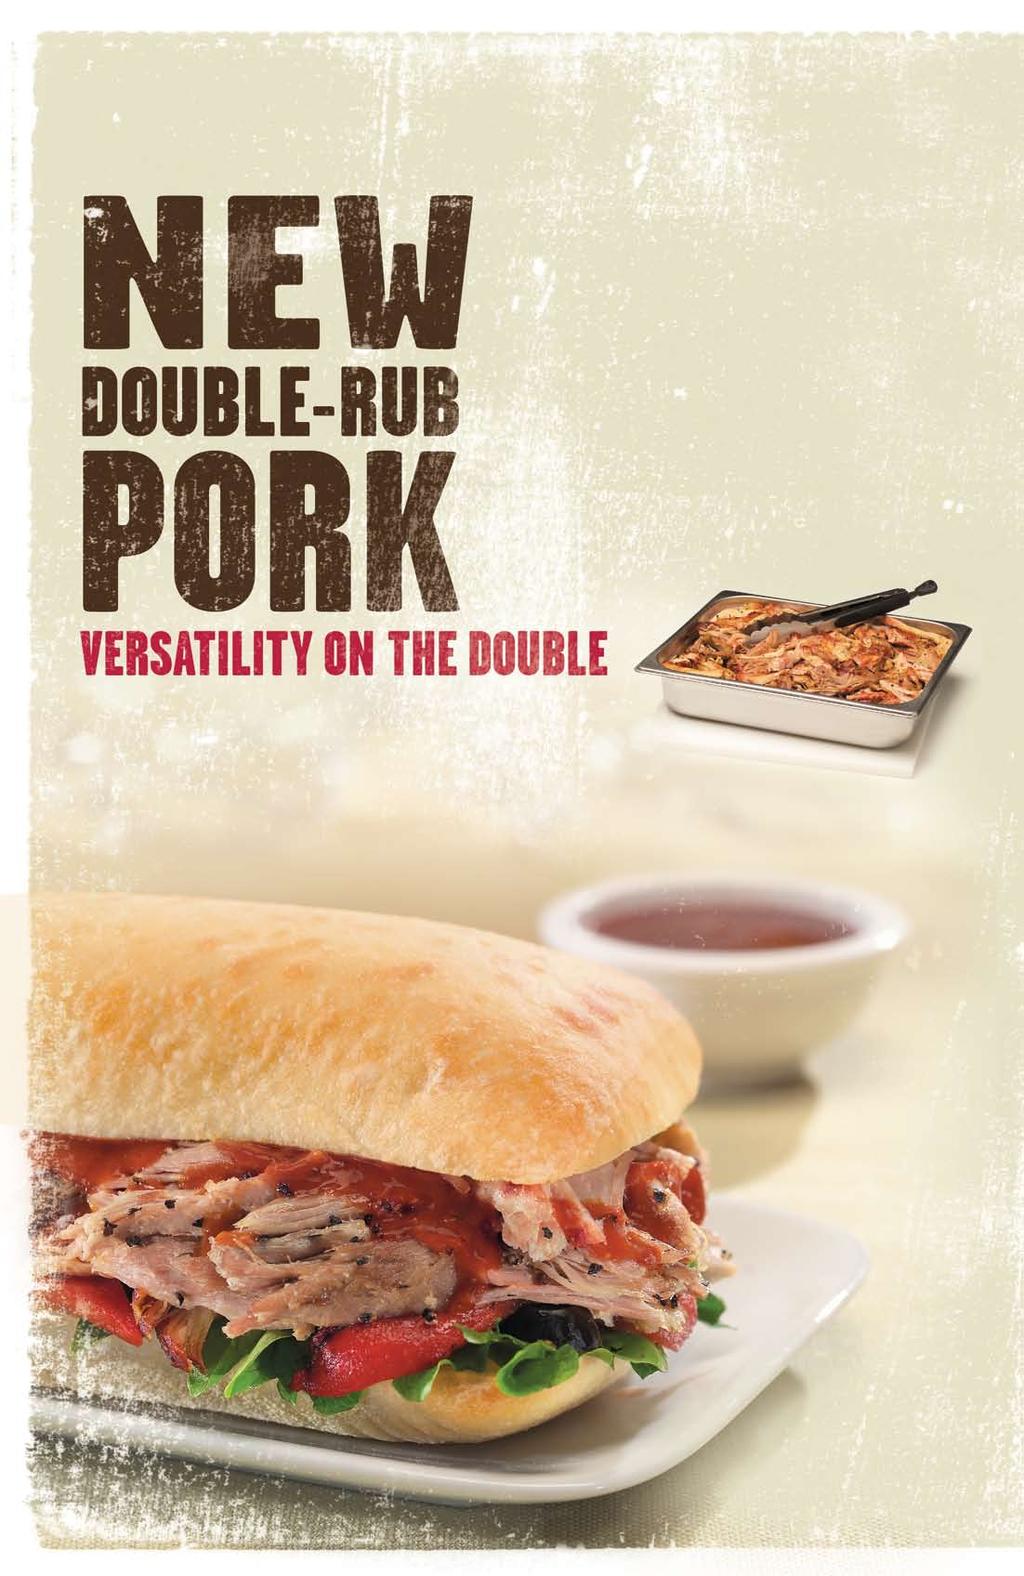 RICH s Smokehouse BAR-B-Q Our double-rub pork is first handrubbed with a blend of kosher salt and course ground pepper to draw out mouthwatering flavor. The meat is then smoked real slow.